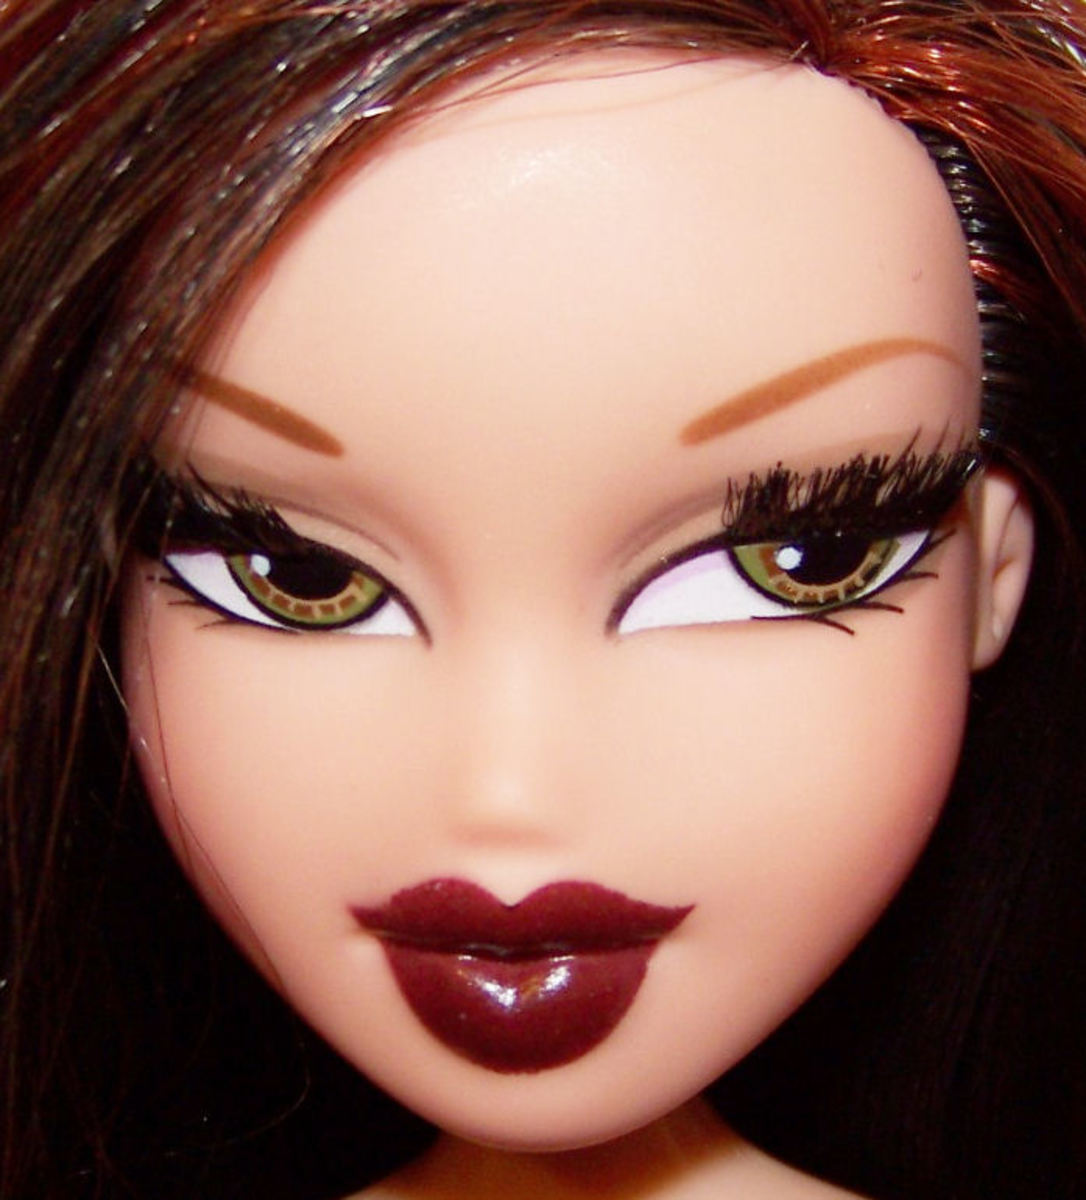 Bratz fashion dolls were introduced in 2001.  The toys featured full, lush lips with lipstick and large, almond-shaped eyes with eyeshadow.  The 10-inch dolls competed with Mattel's Barbie product line and consisted of 40% of the fashion doll market.